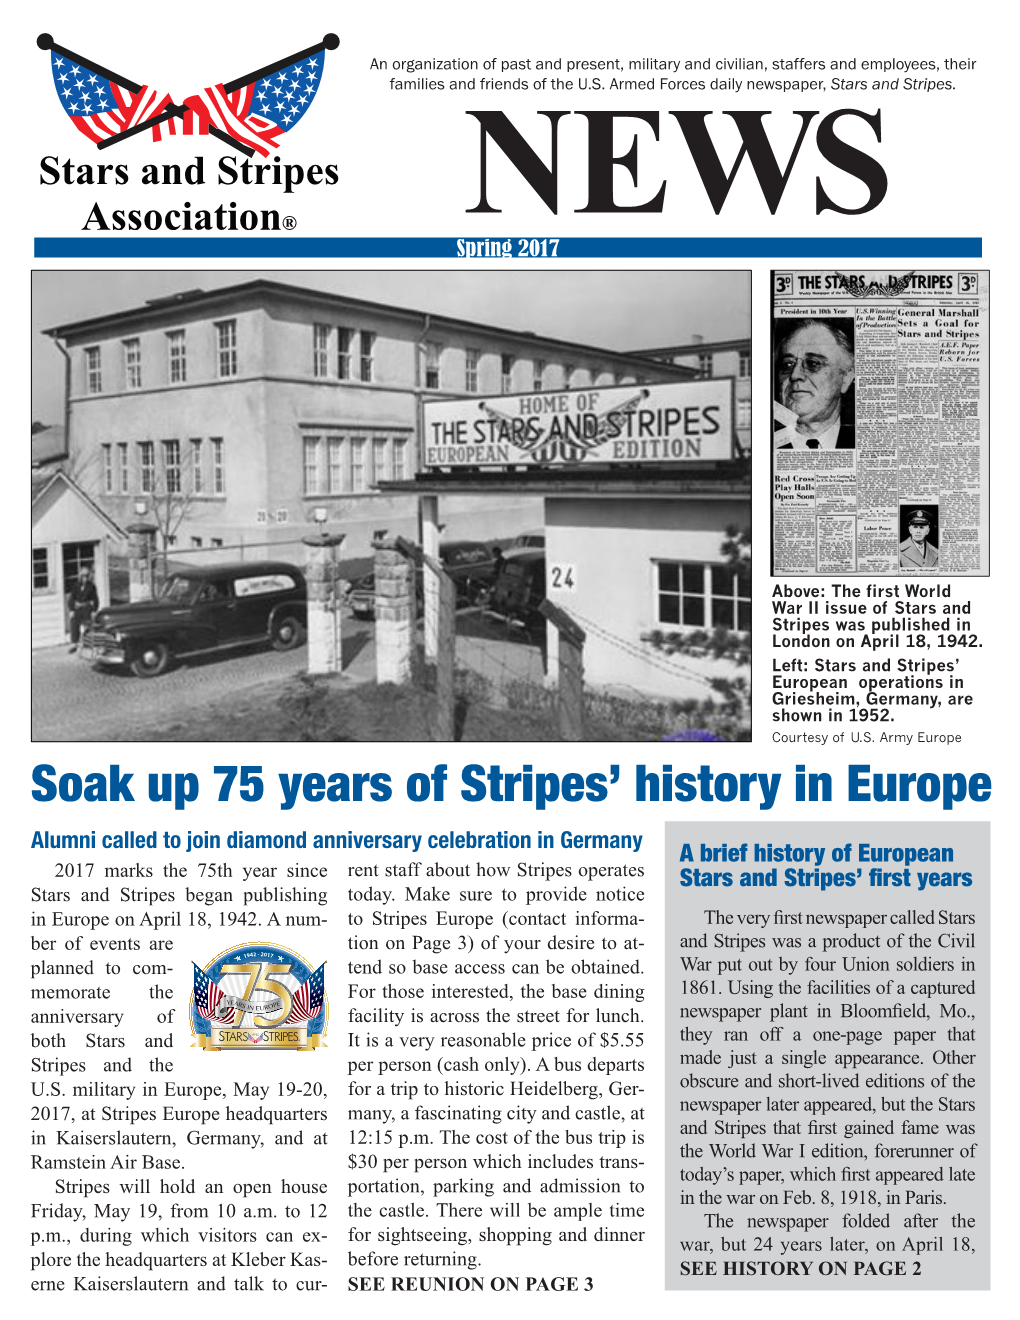 Soak up 75 Years of Stripes' History in Europe